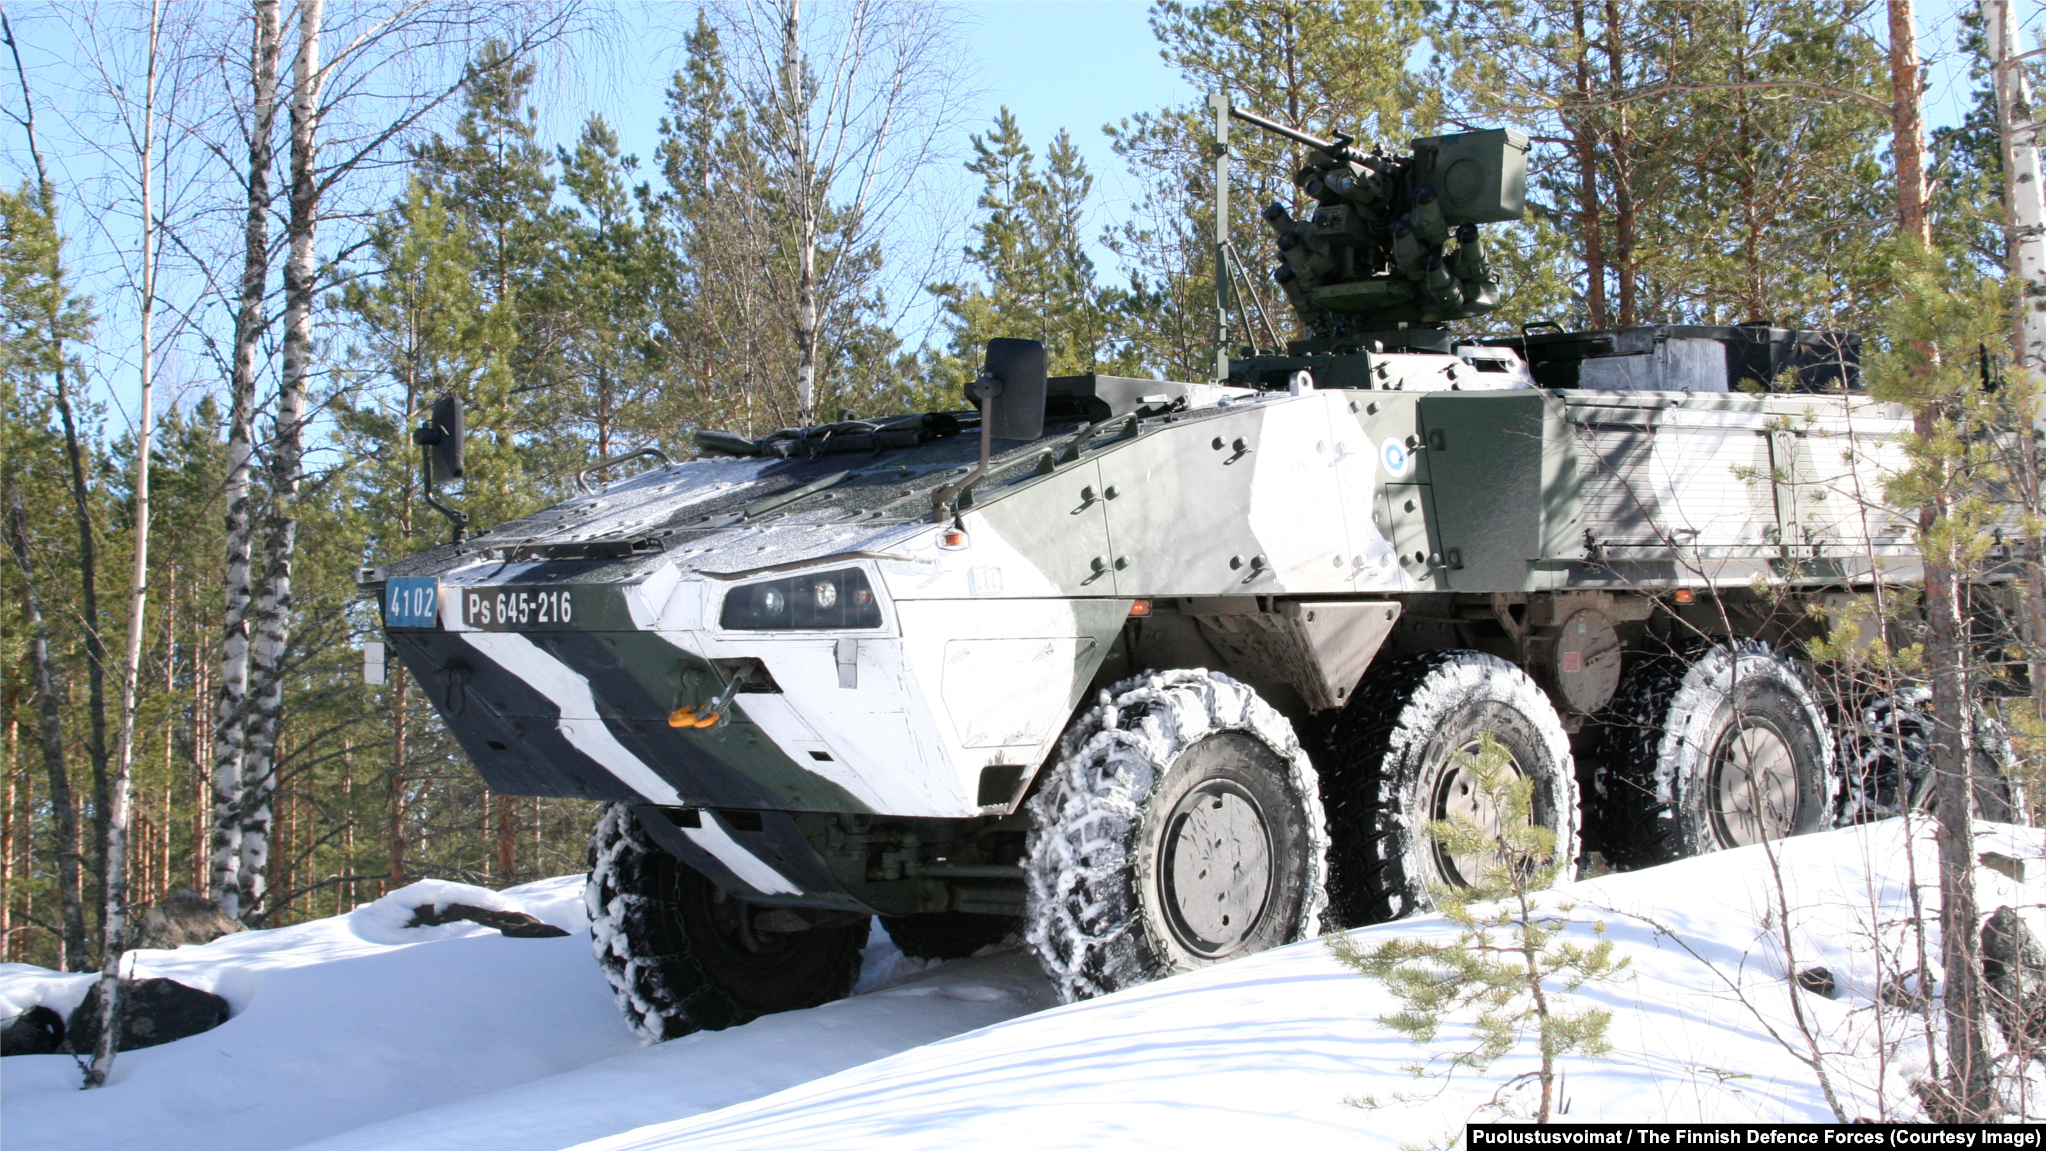 Patria XA-360 Armored Personnel Carrier This Finnish-made vehicle features a weapons system that can be aimed remotely by a gunner locked inside the APC's hull. Up to 11 soldiers can be carried into battle in the vehicle, which was designed to be able to “wade” through Finland’s swampy landscape.